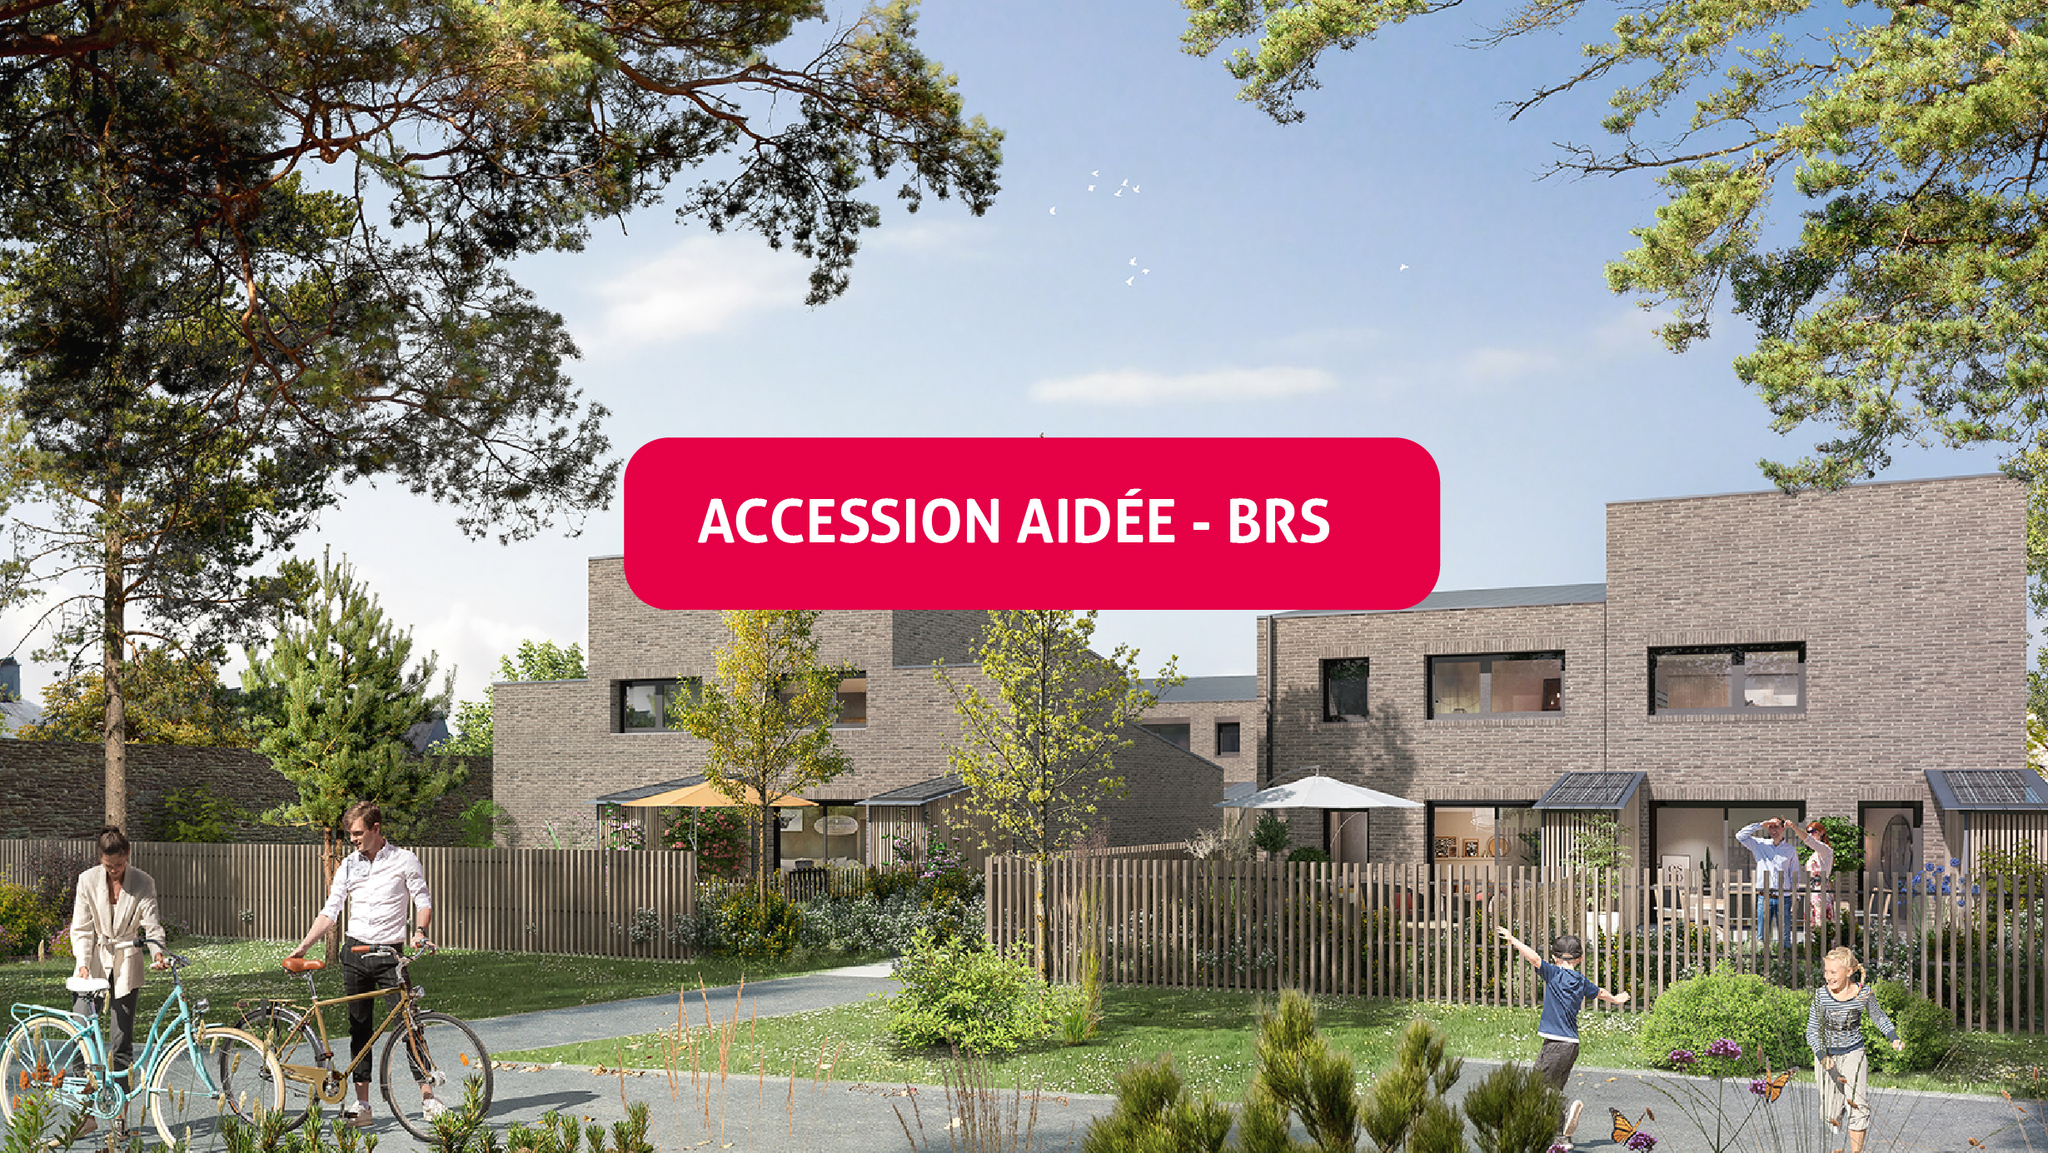 Programme immobilier neuf NATICE - Accession aidée BRS